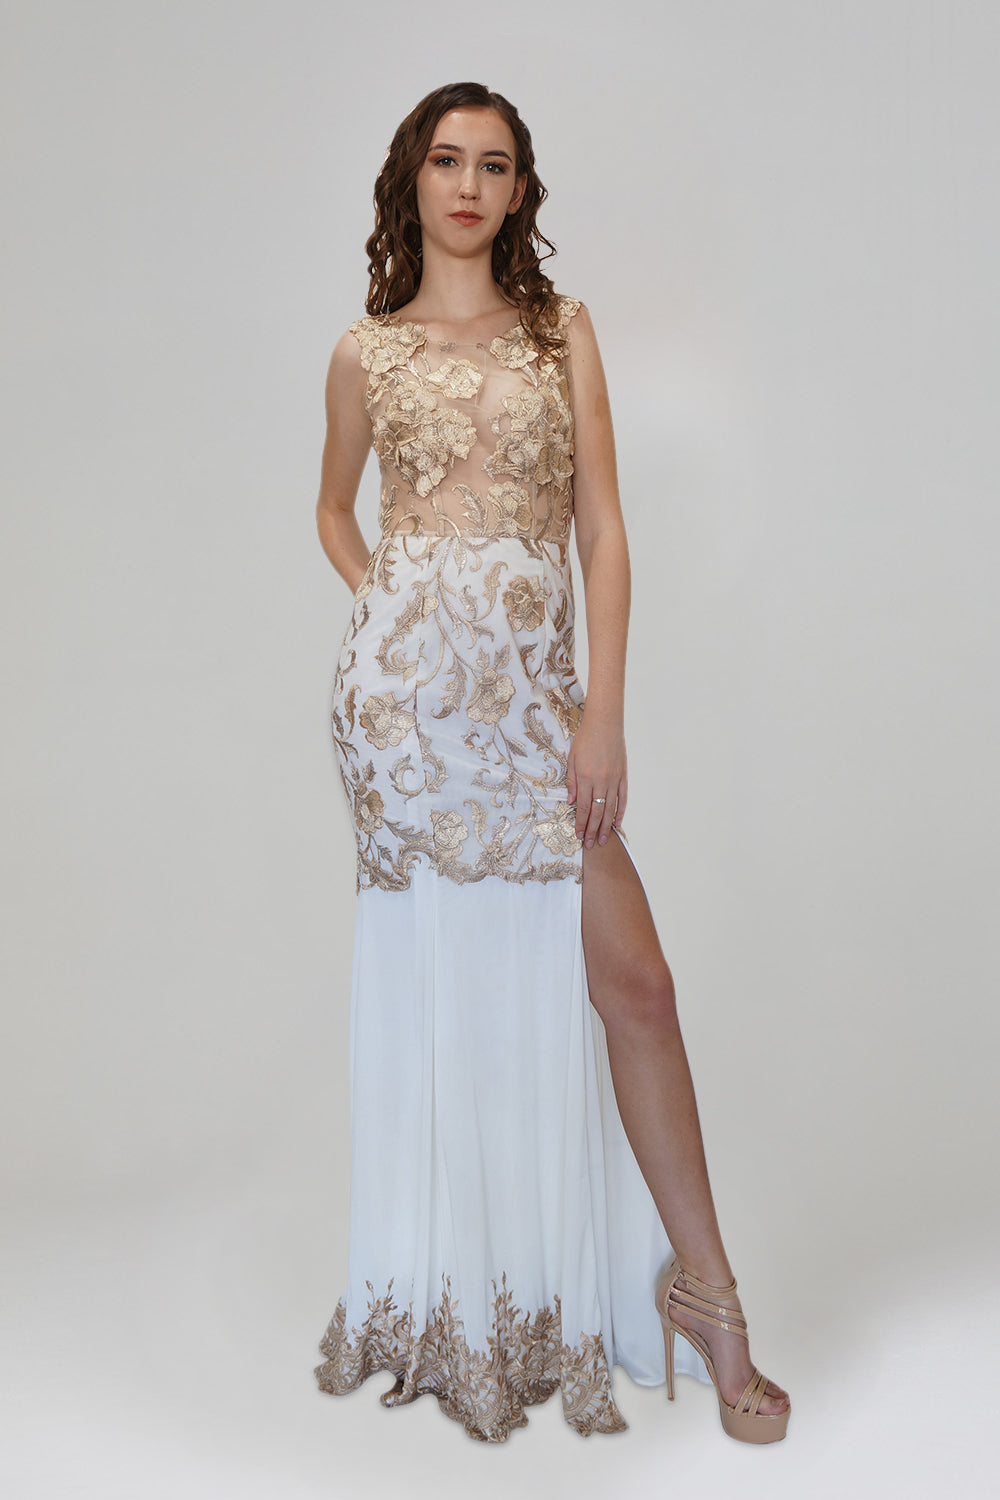 gold embroidered lace illusion bodice formal dress envious bridal & formal